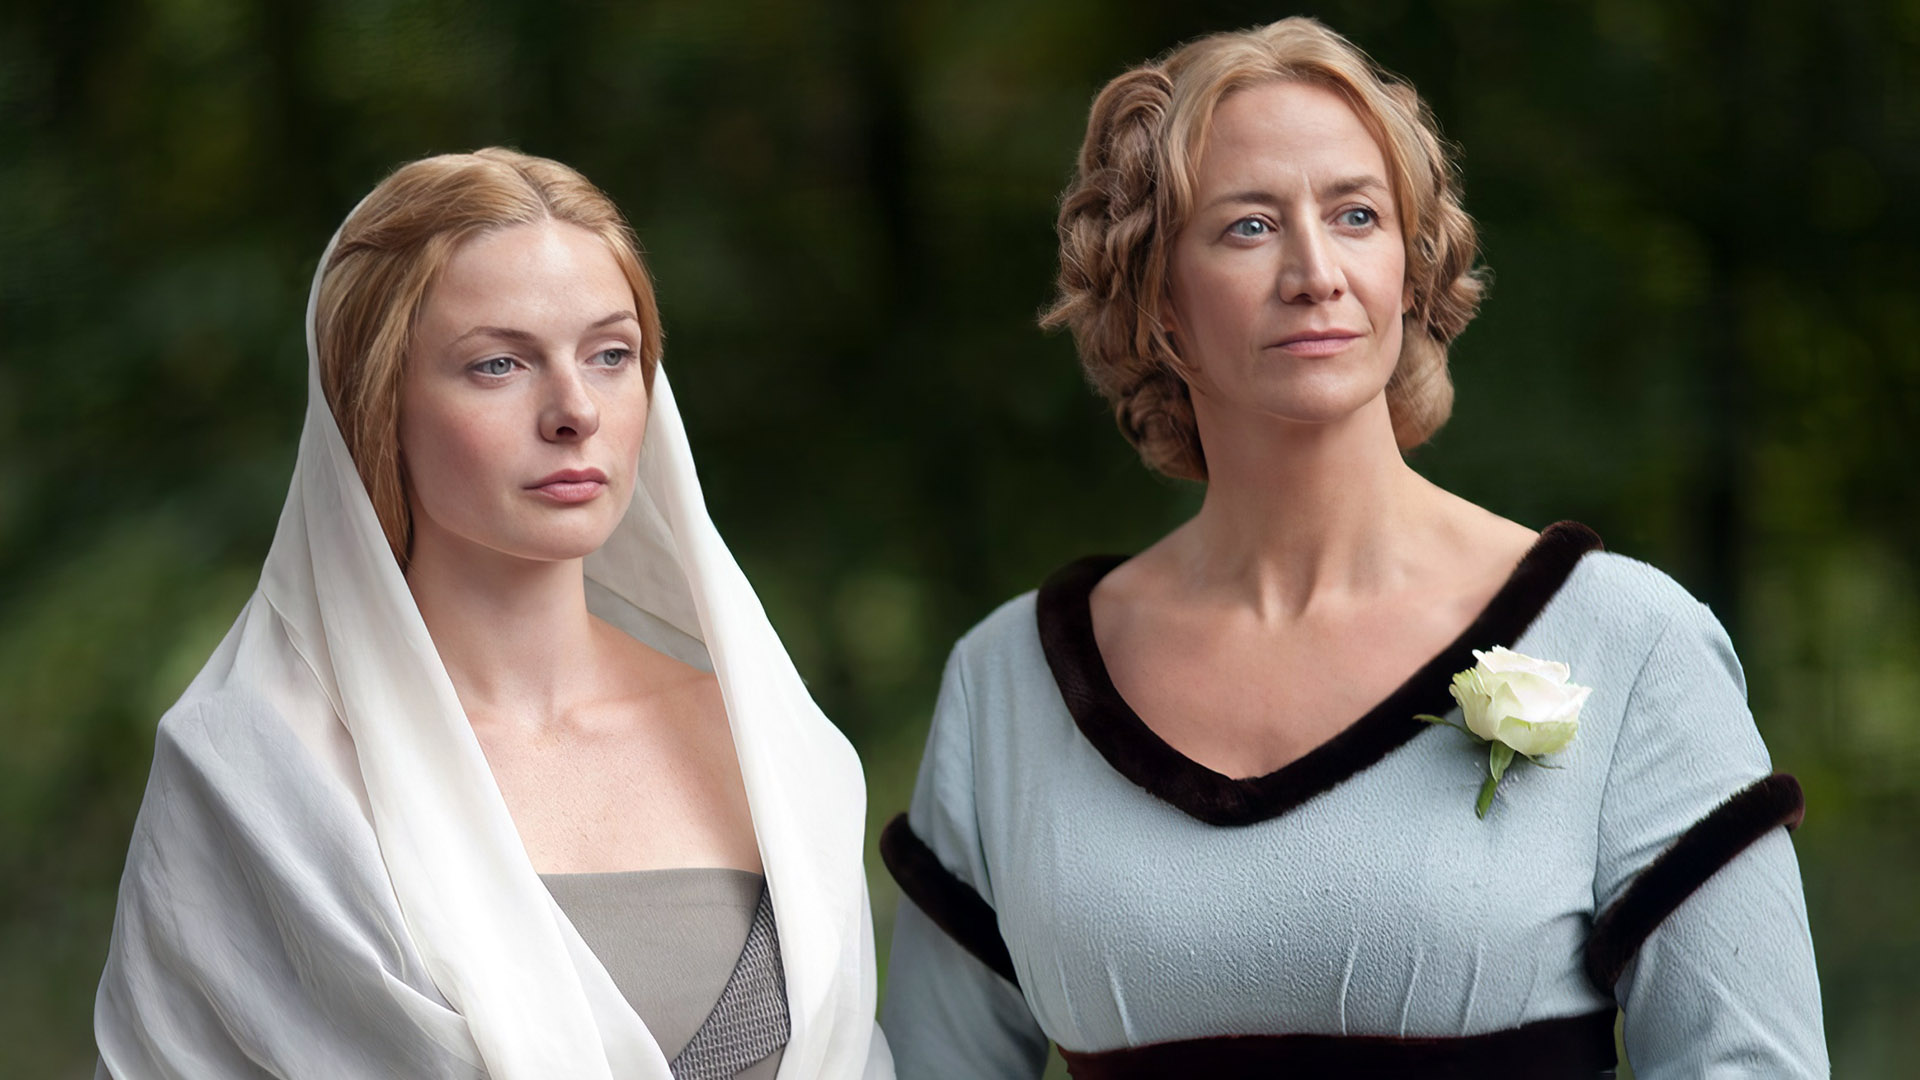 15 Best Shows To Watch if You Like The White Queen, Ranked